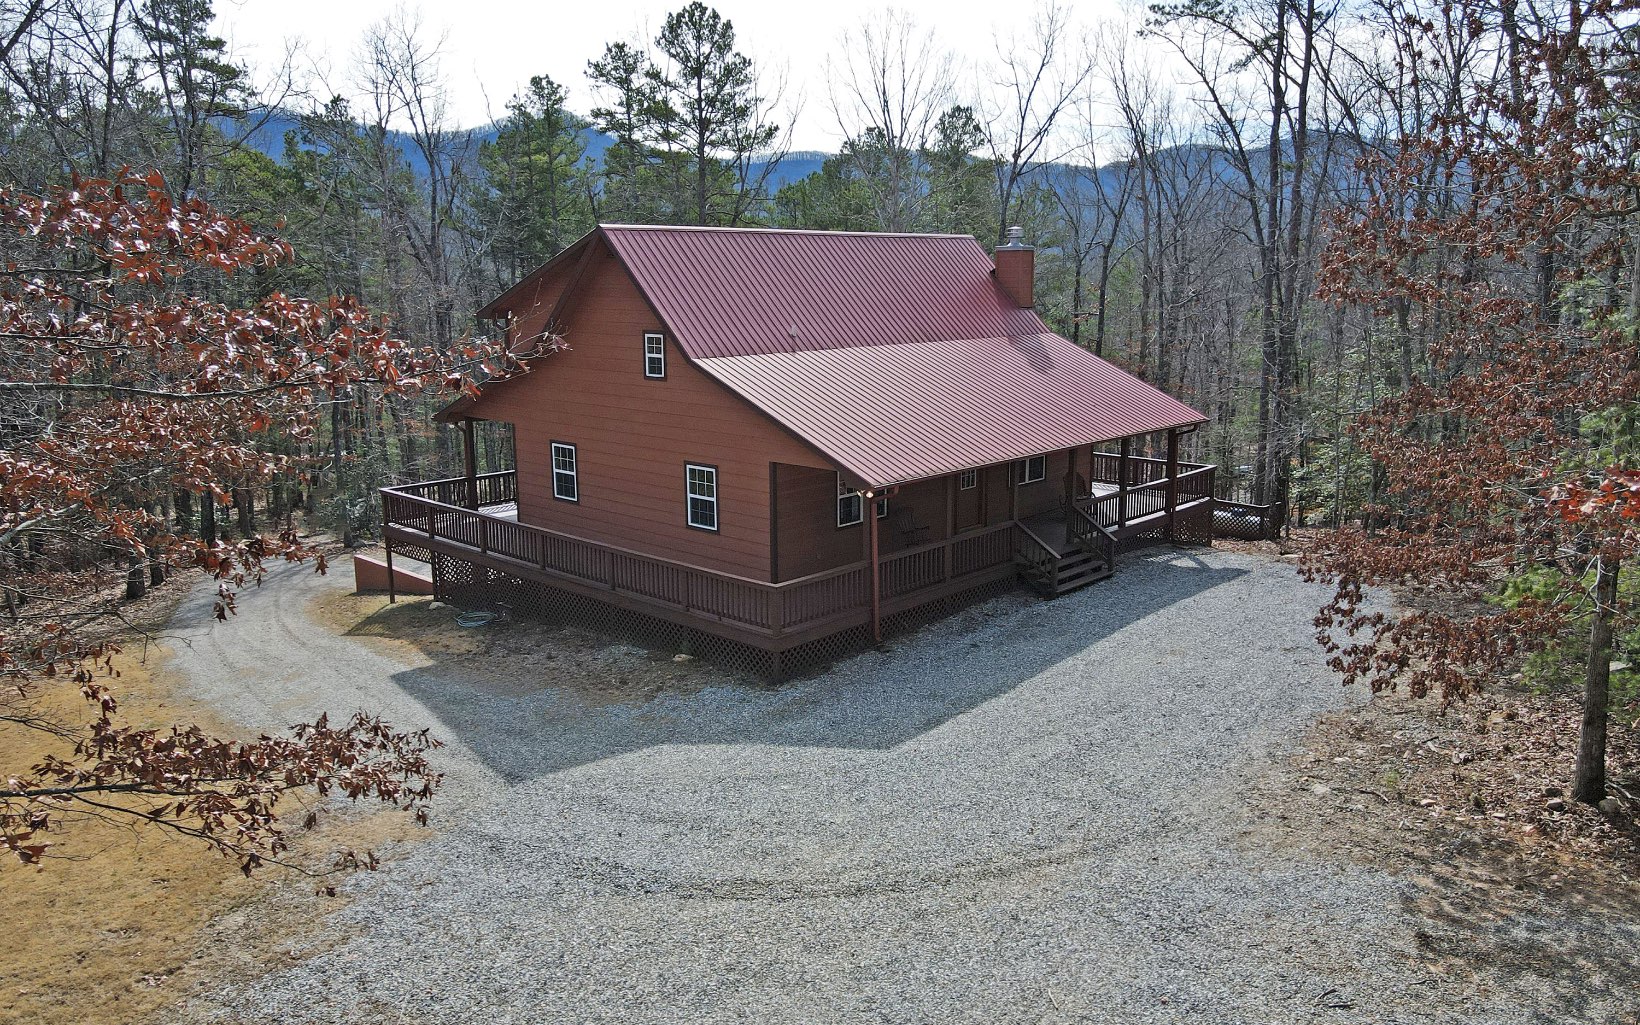 Cabin in the Woods with Private Setting! 2.95 Acres with Complete Wrap Around Deck to Enjoy the Seasonal Mtn Views! Rustic Inside & Out + Wood/Sheetrock Mix for a Pop of Color. Vaulted Tongue & Groove Wood Ceilings, Gorgeous Hardwood Floors, Rocked 'Vented' Fireplace Quality Wood Doors & Metal Roof. Kitchen with Granite Countertops, SS Appliances & Dining Area w/ Access to the Porch to Enjoy the Deer & Fresh Mtn Air! Main Floor Bed/Bath. Master Upstairs + Huge Loft for Office or Play Room? Baths Offer Granite & Tile Showers/Baths. SPACIOUS LIVING in this Mtn Cabin! Basement Offers another Bed/Bath + Bonus Craft-Room, Lots of Open Space for a Family/Game Room + Stubbed for a KITCHEN "In-Law Suite Potential"! Plenty of Room for your Family & Friends to Enjoy! Main Level & Basement Level Parking + Potential RV Parking? Private Well. Useable Wooded Property!